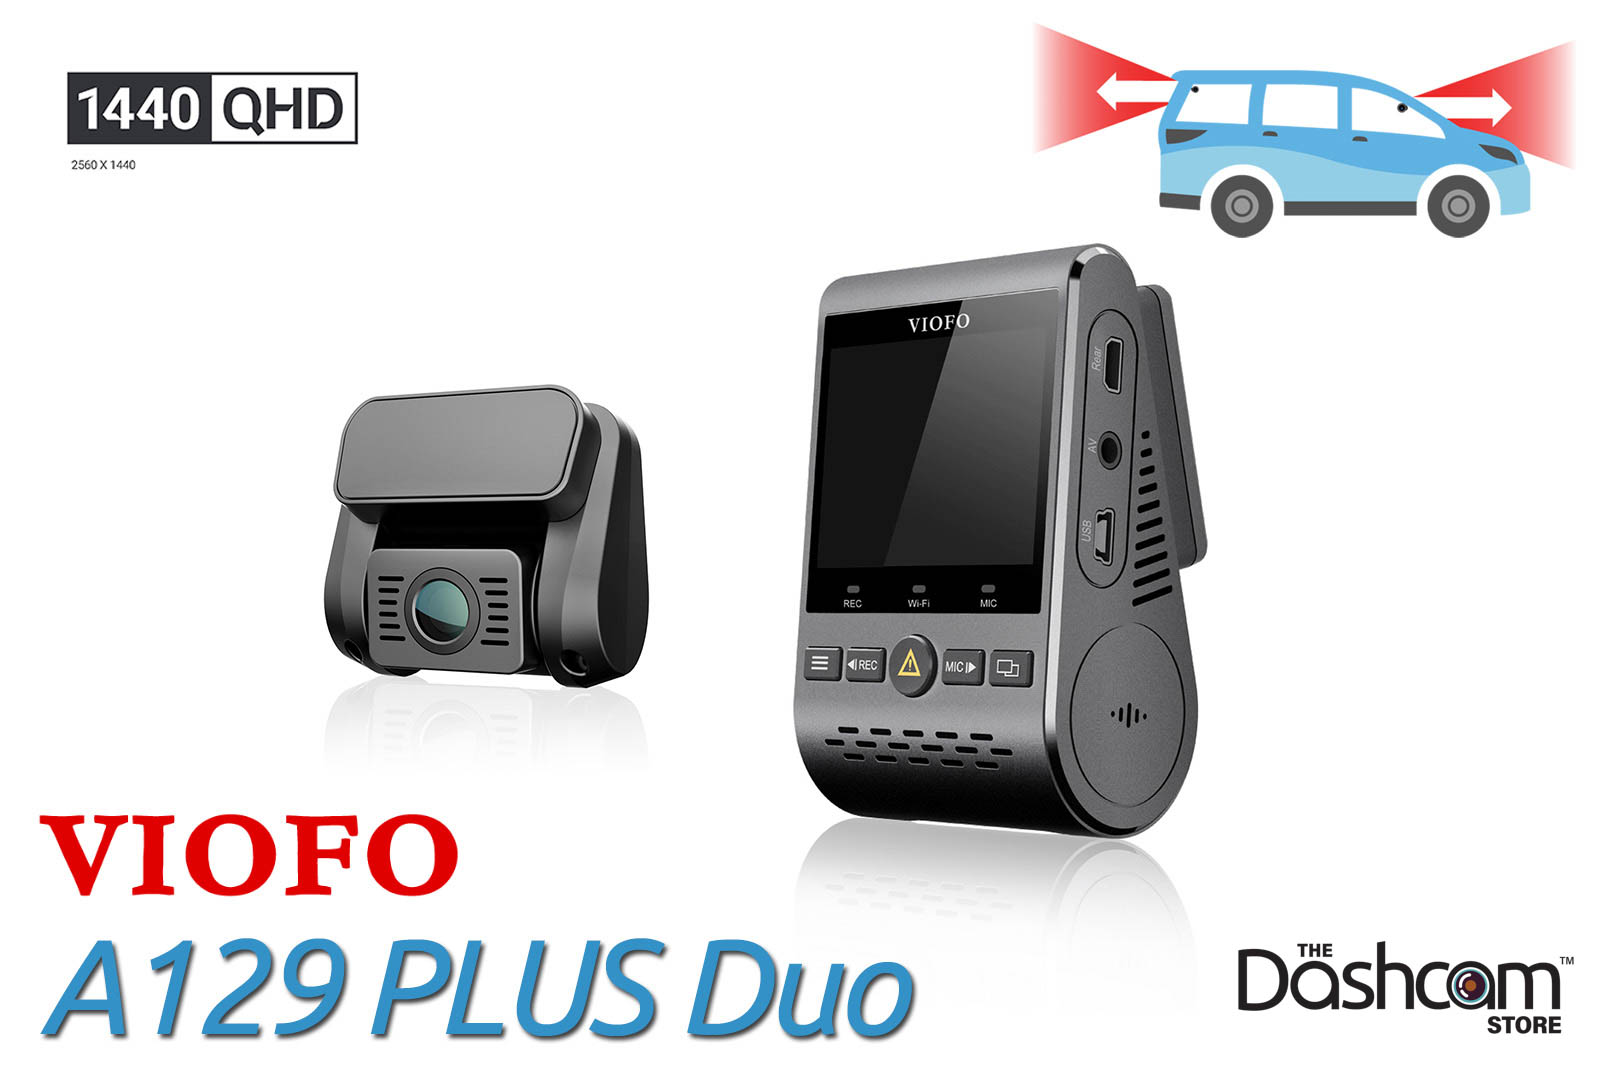 https://cdn11.bigcommerce.com/s-za60ms/images/stencil/original/products/680/12629/thedashcamstore-viofo-a129-plus-duo-thumbnail__07420.1663085746.jpg?c=2